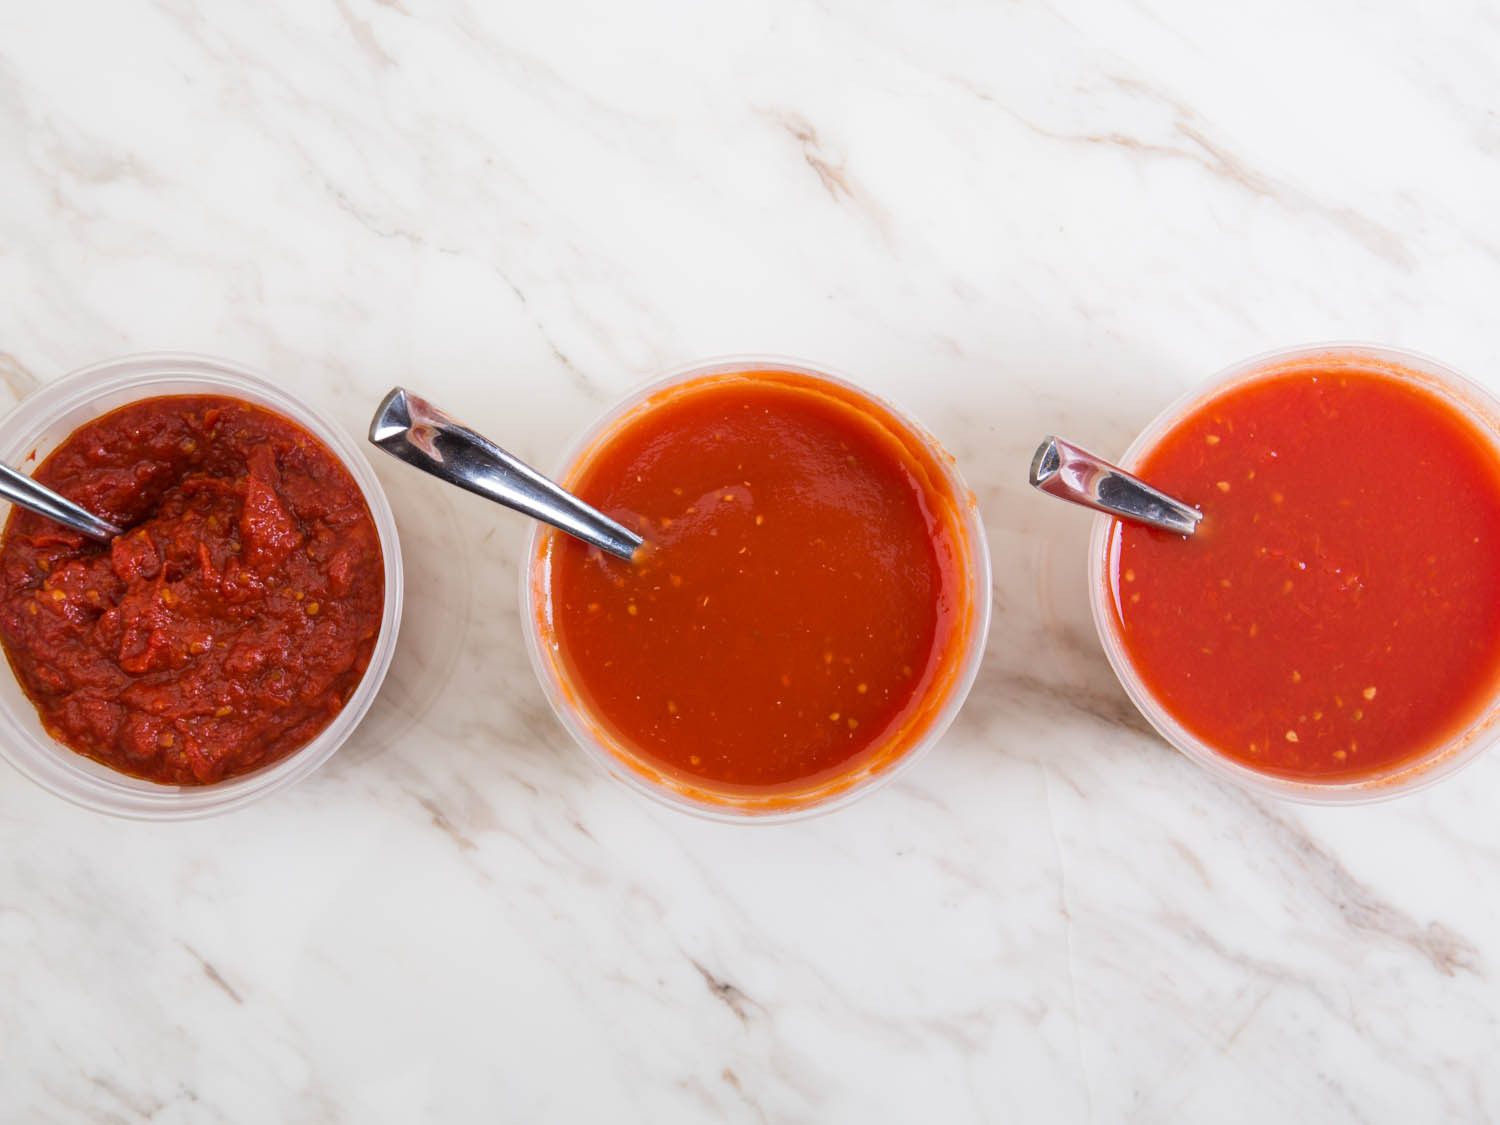 Tomato Sauce From Tomato Paste
 How to Make the Best Tomato Sauce From Fresh Tomatoes